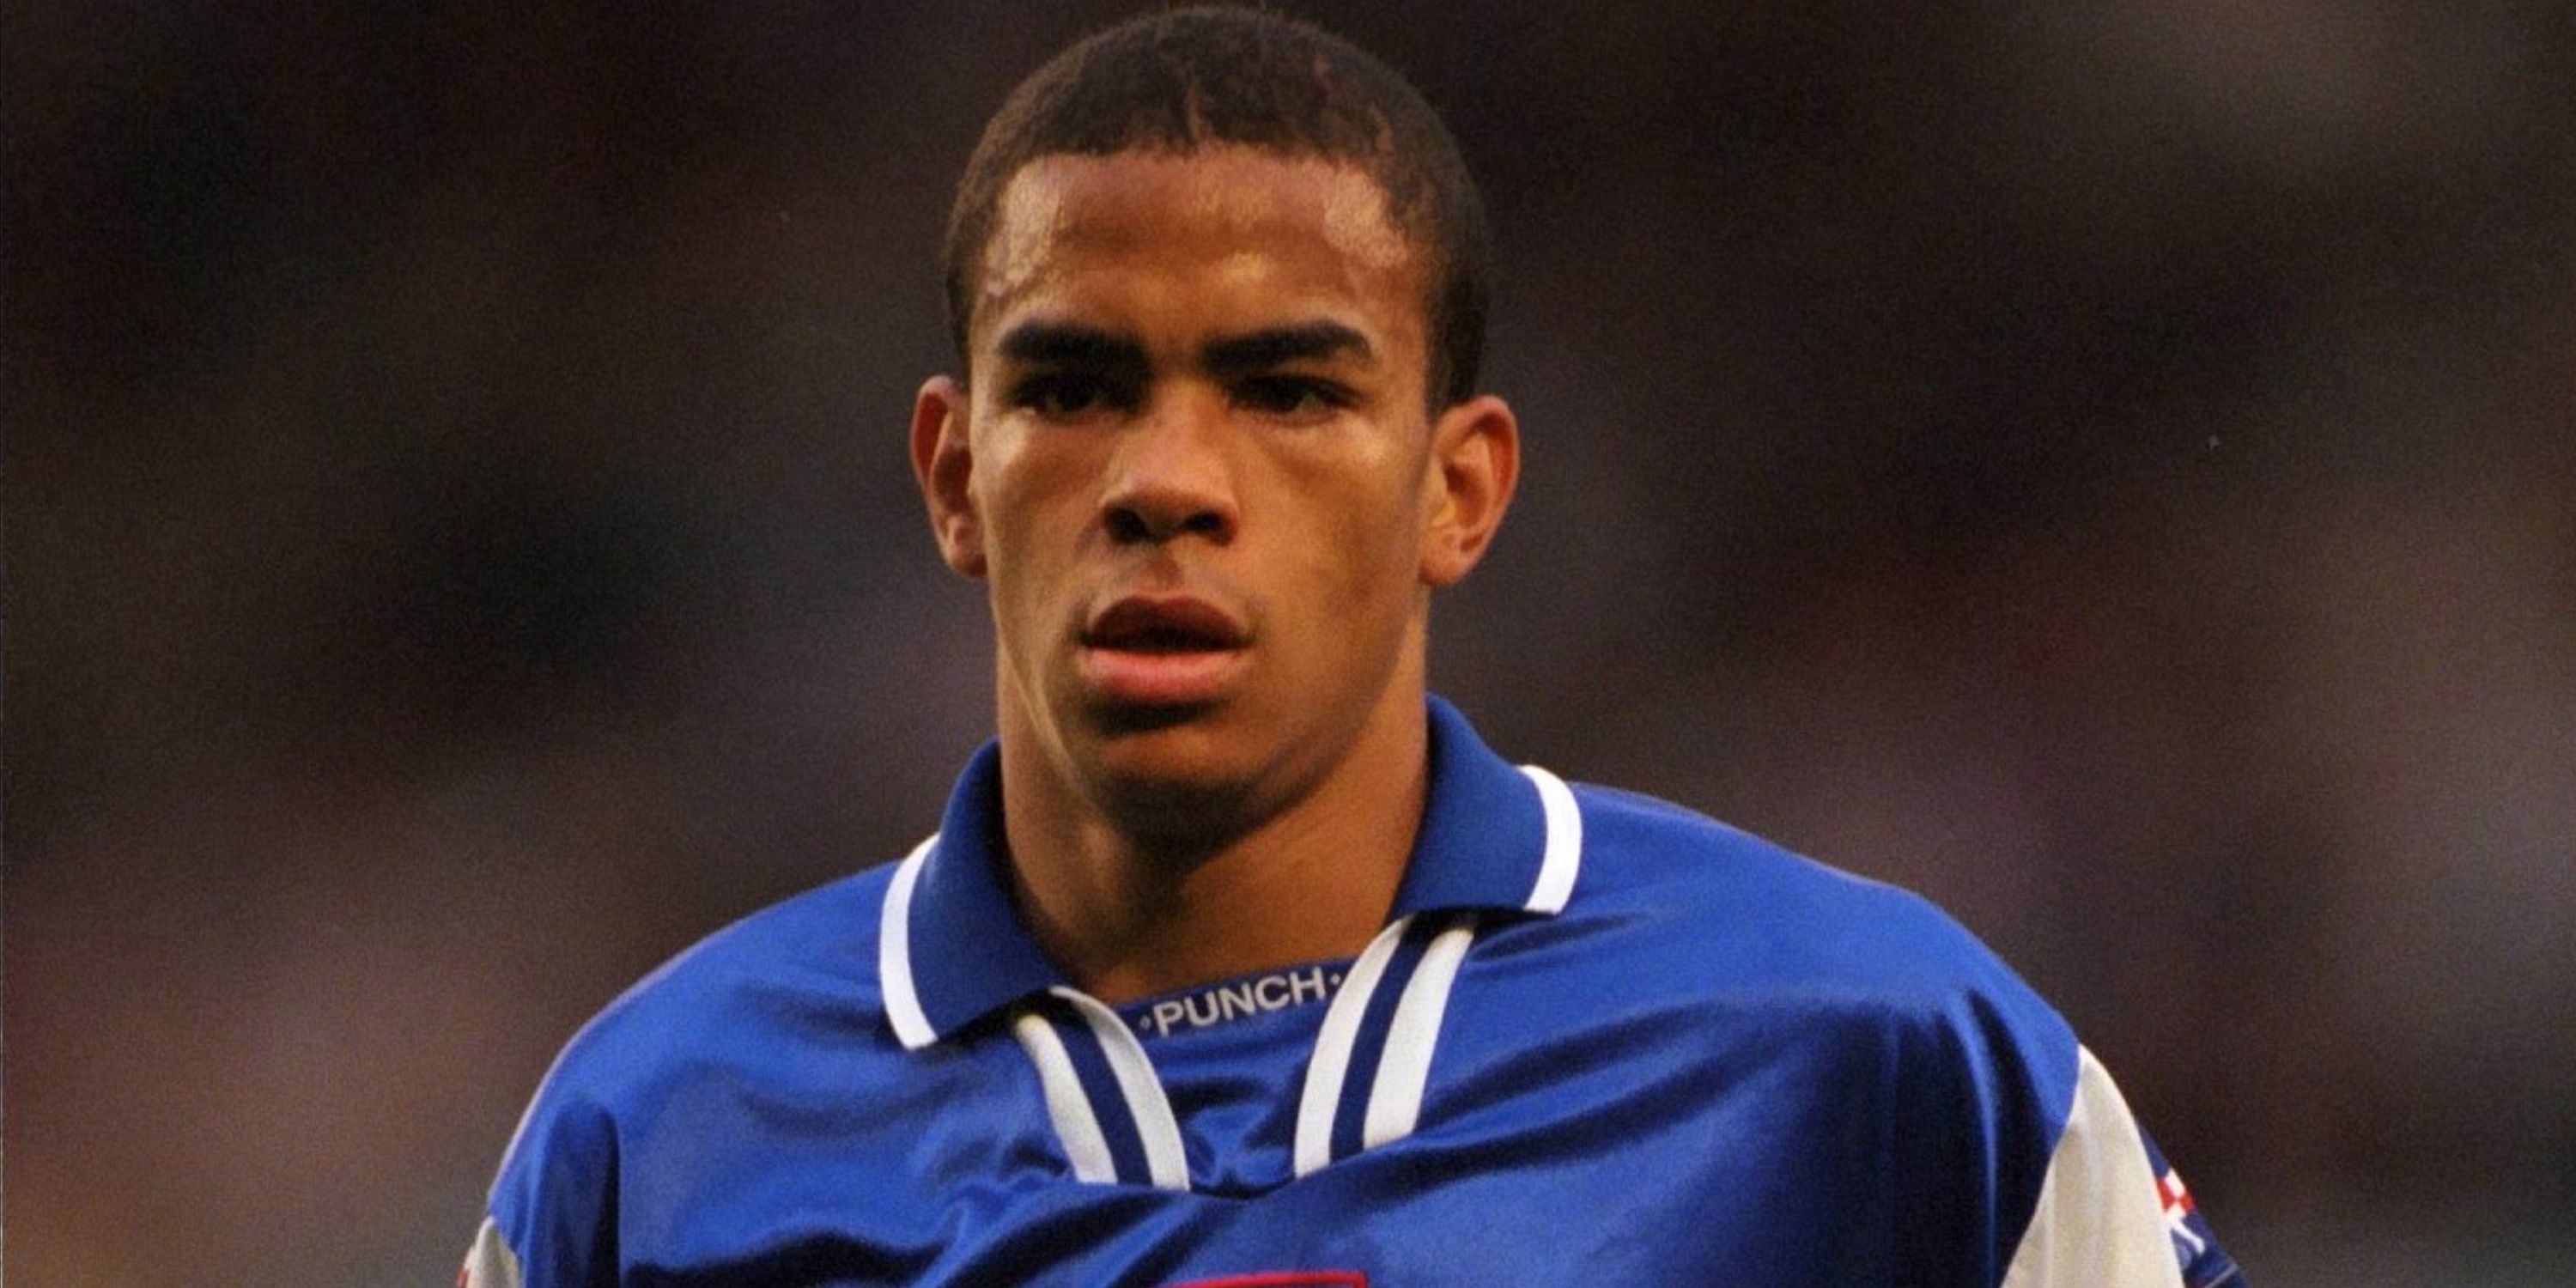 Kieron Dyer in action for Ipswich